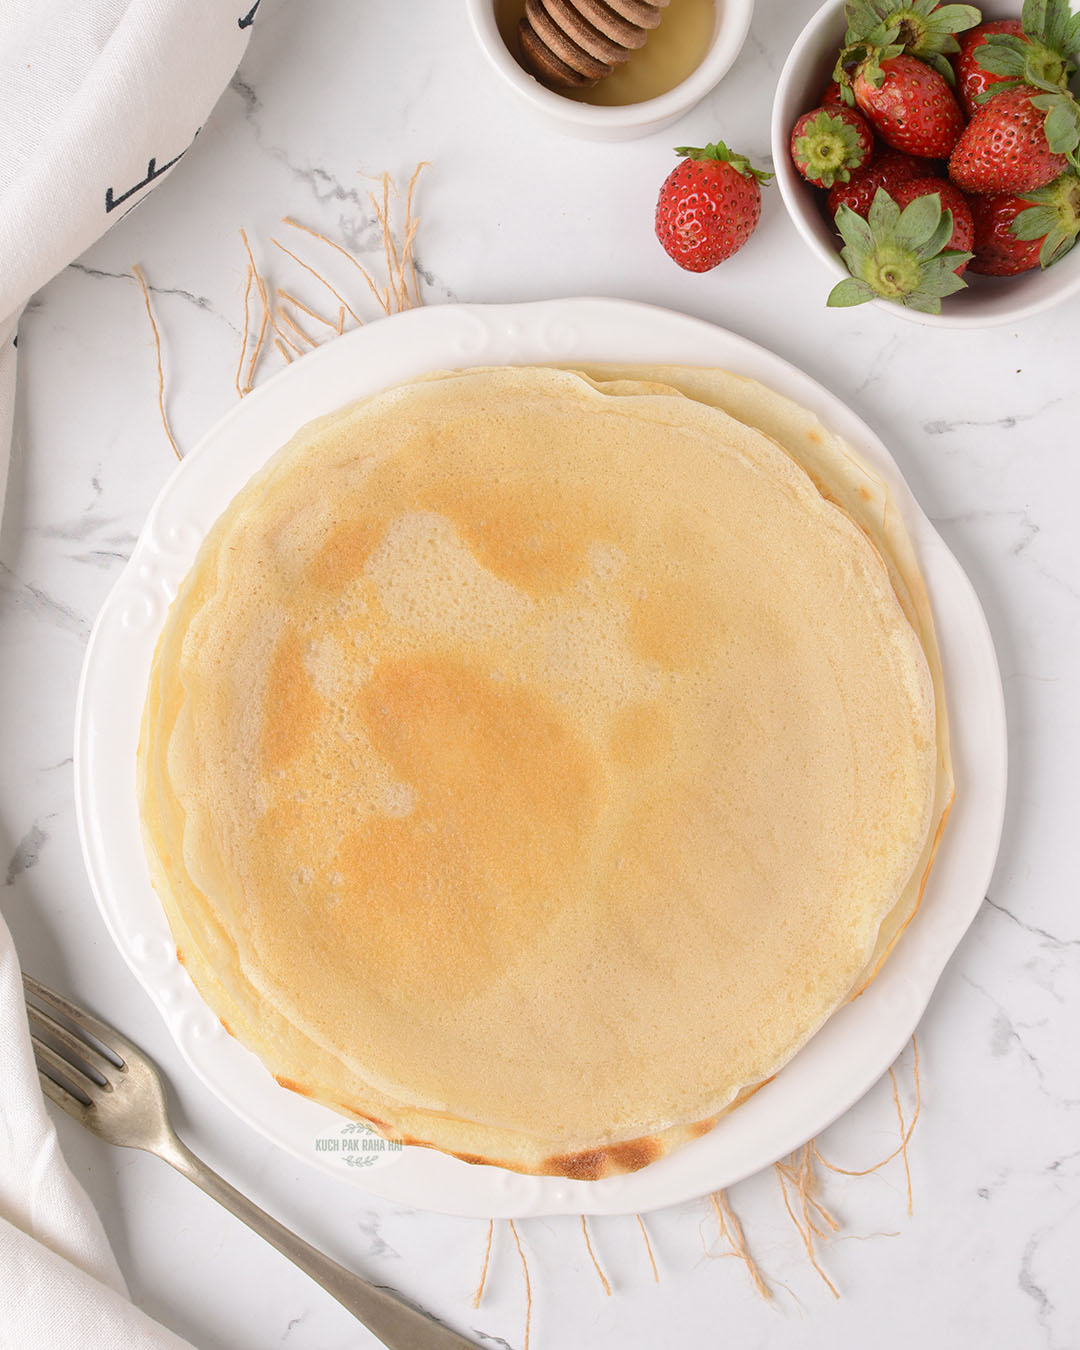 How to make crepes without eggs